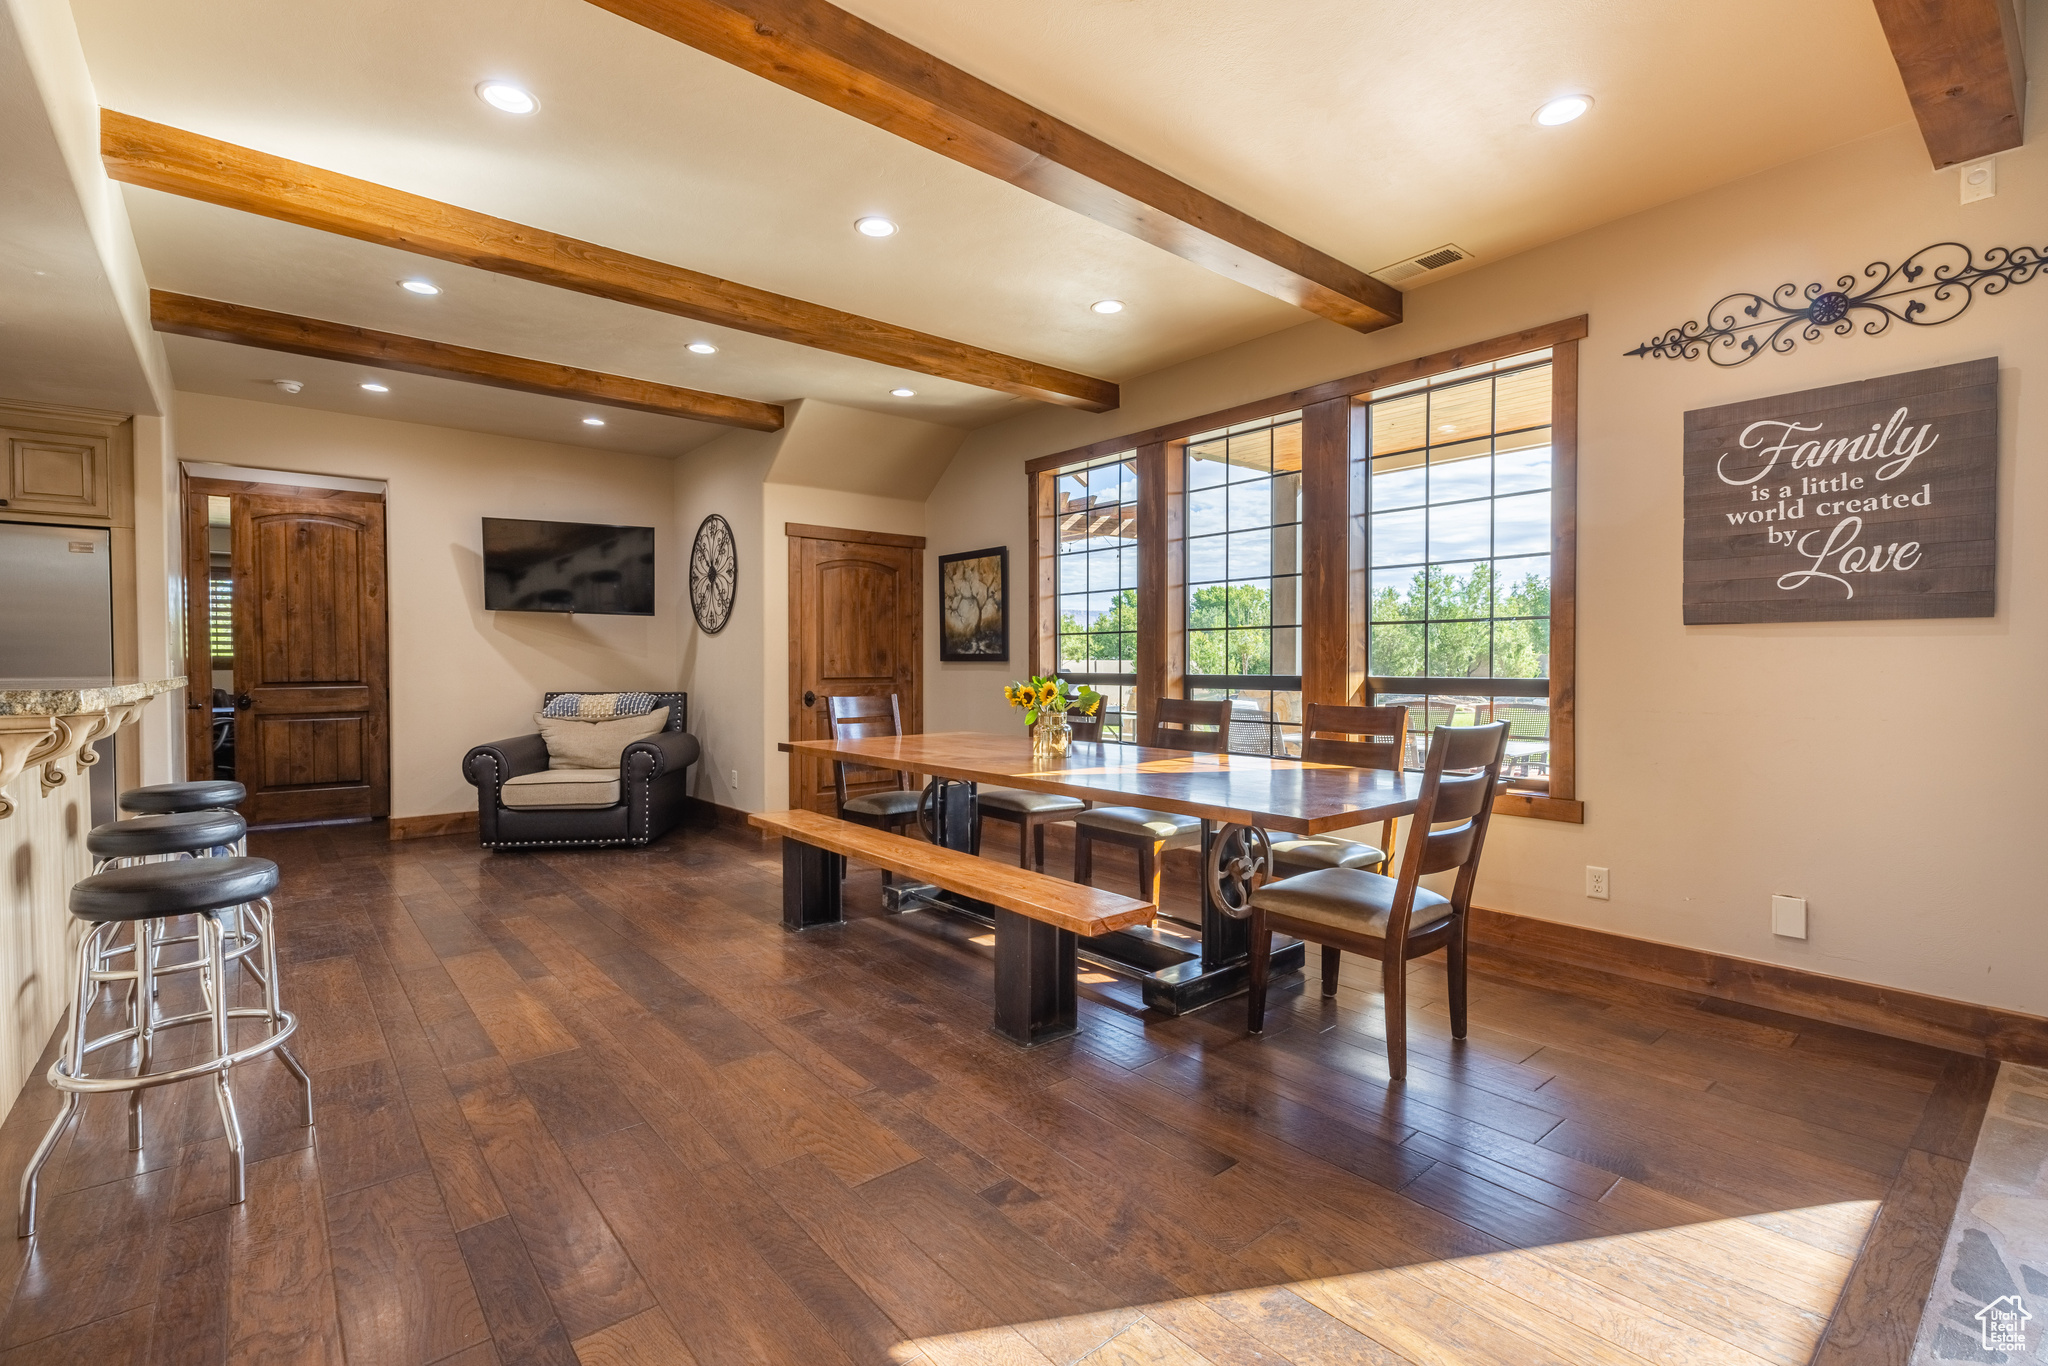 Dining space featuring beam ceiling and dark hardwood / wood-style floors